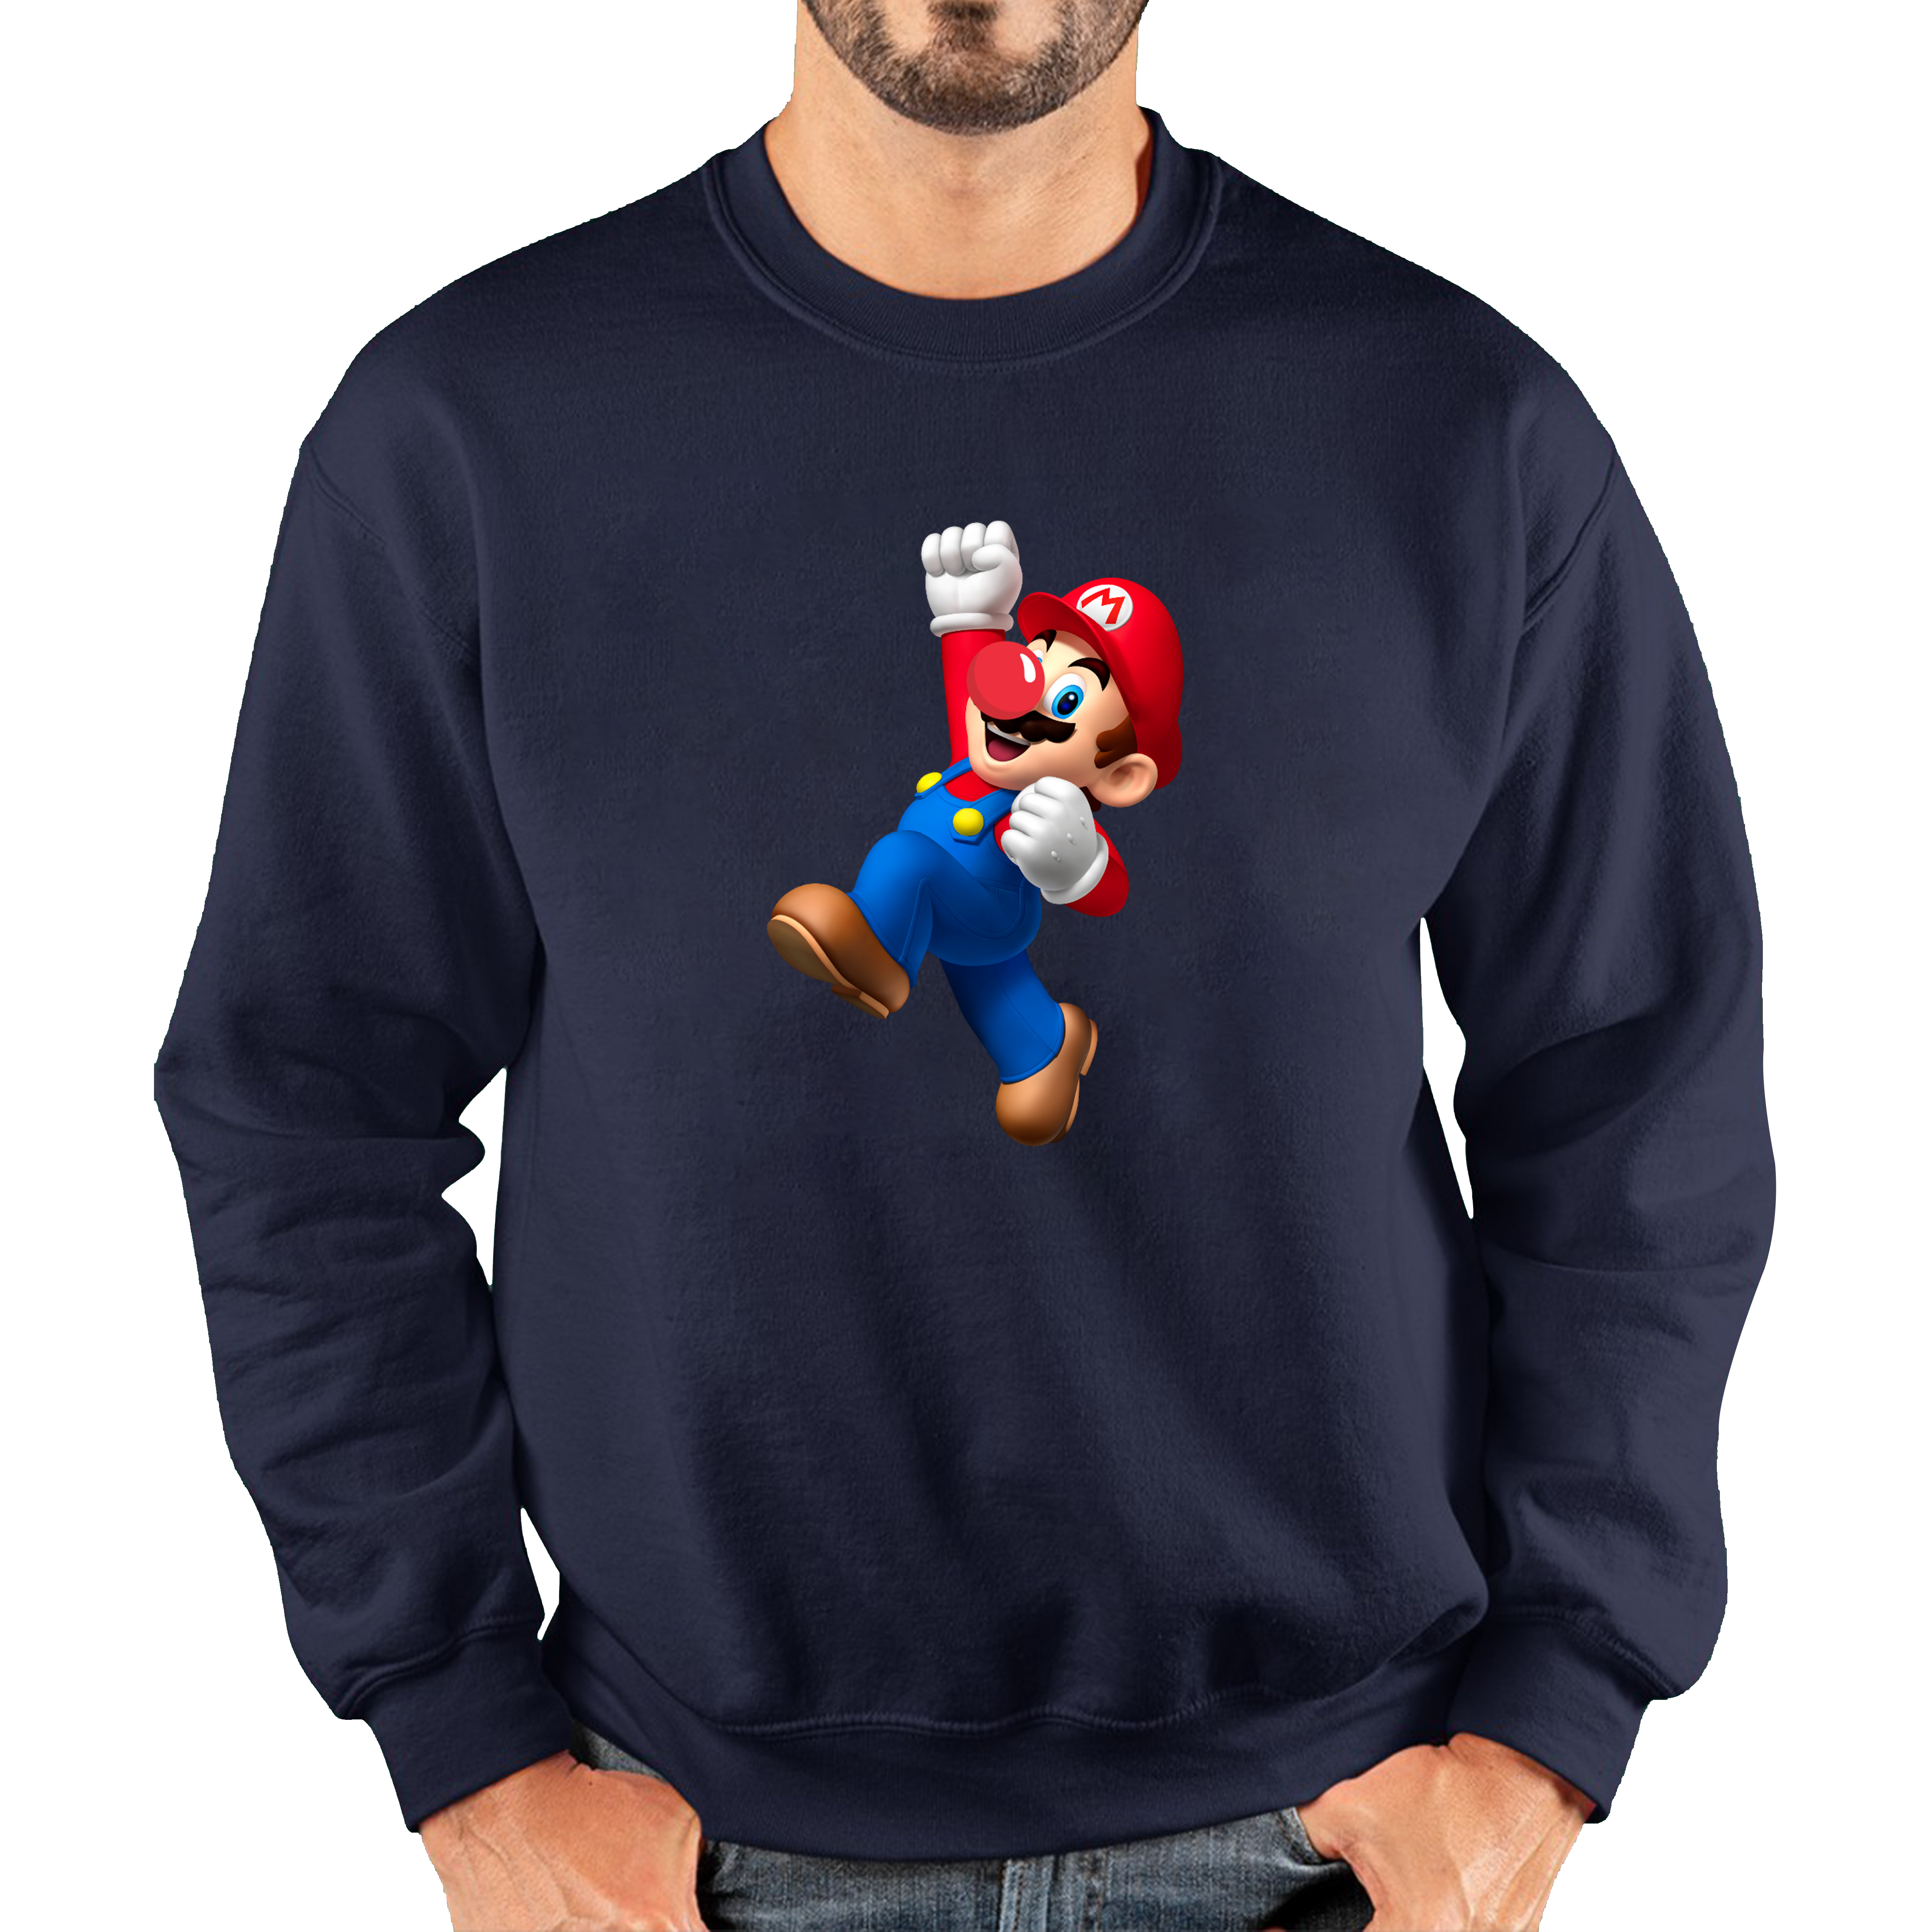 Super Mario Bros Red Nose Day Adult Sweatshirt. 50% Goes To Charity